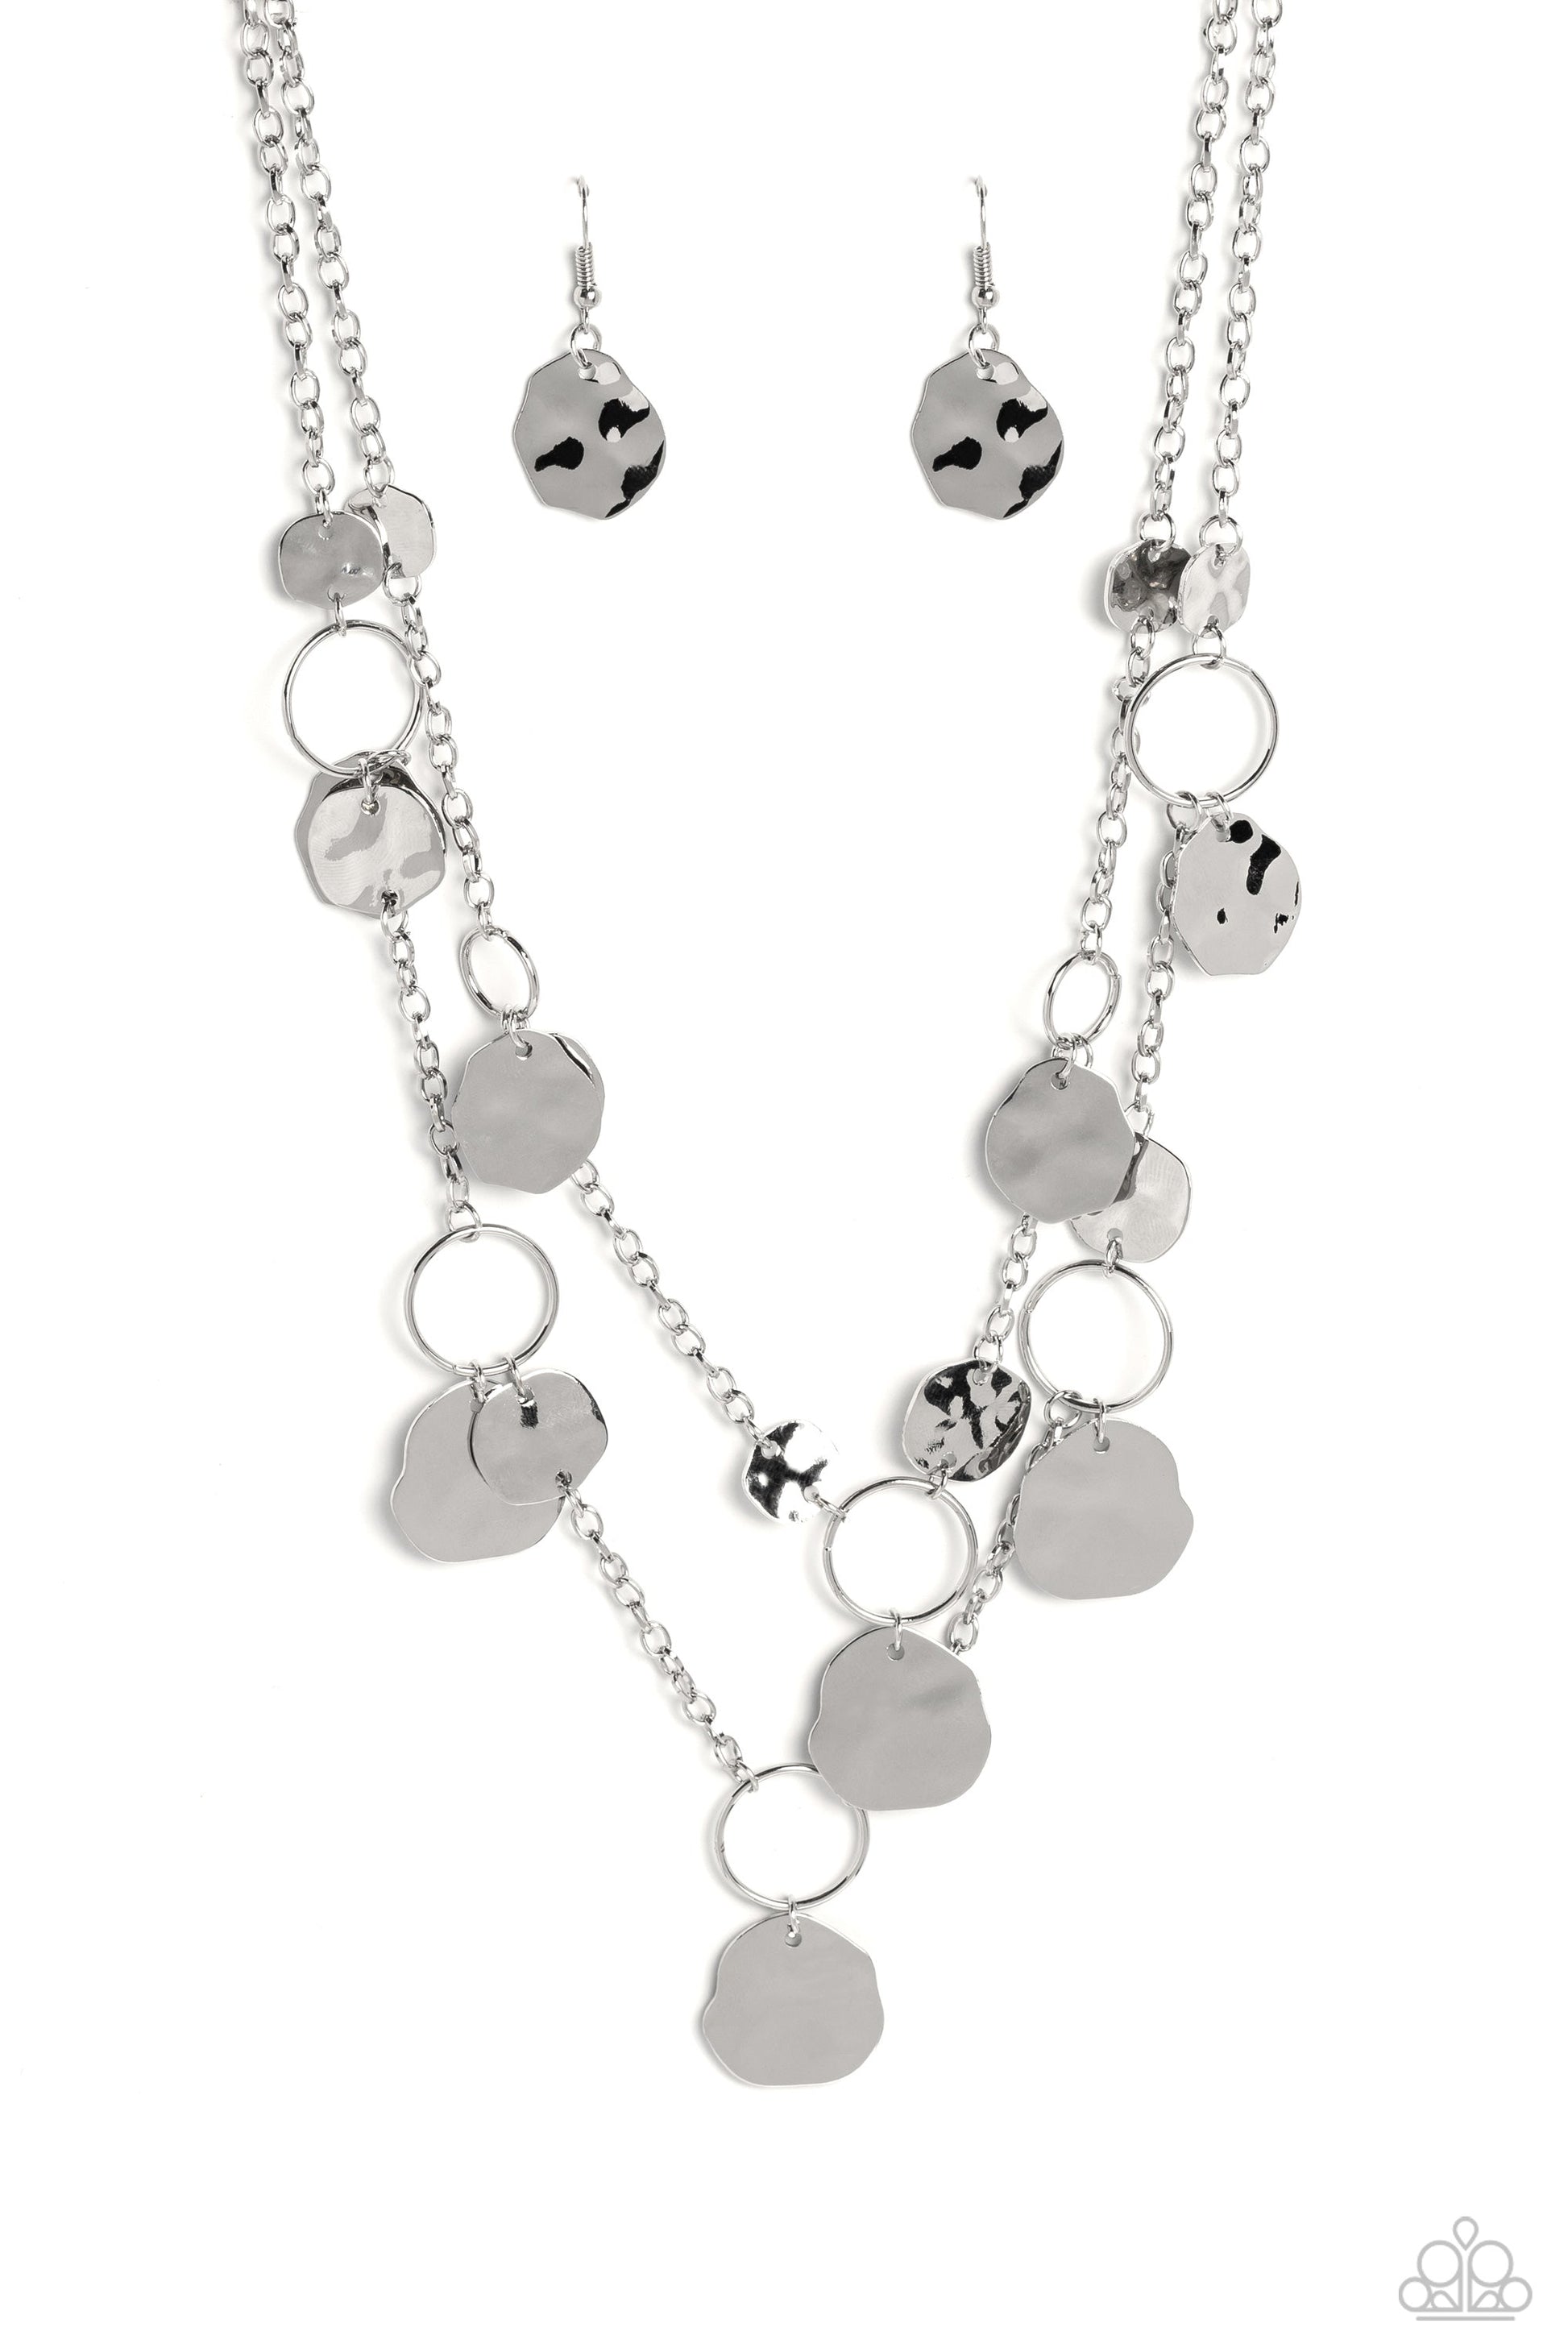 Hammered Horizons - Silver Necklace - Paparazzi Accessories - Infused along two silver chains, smooth silver hoops and abstract, hammered silver discs fall down the neckline for an edgy, boisterous display.